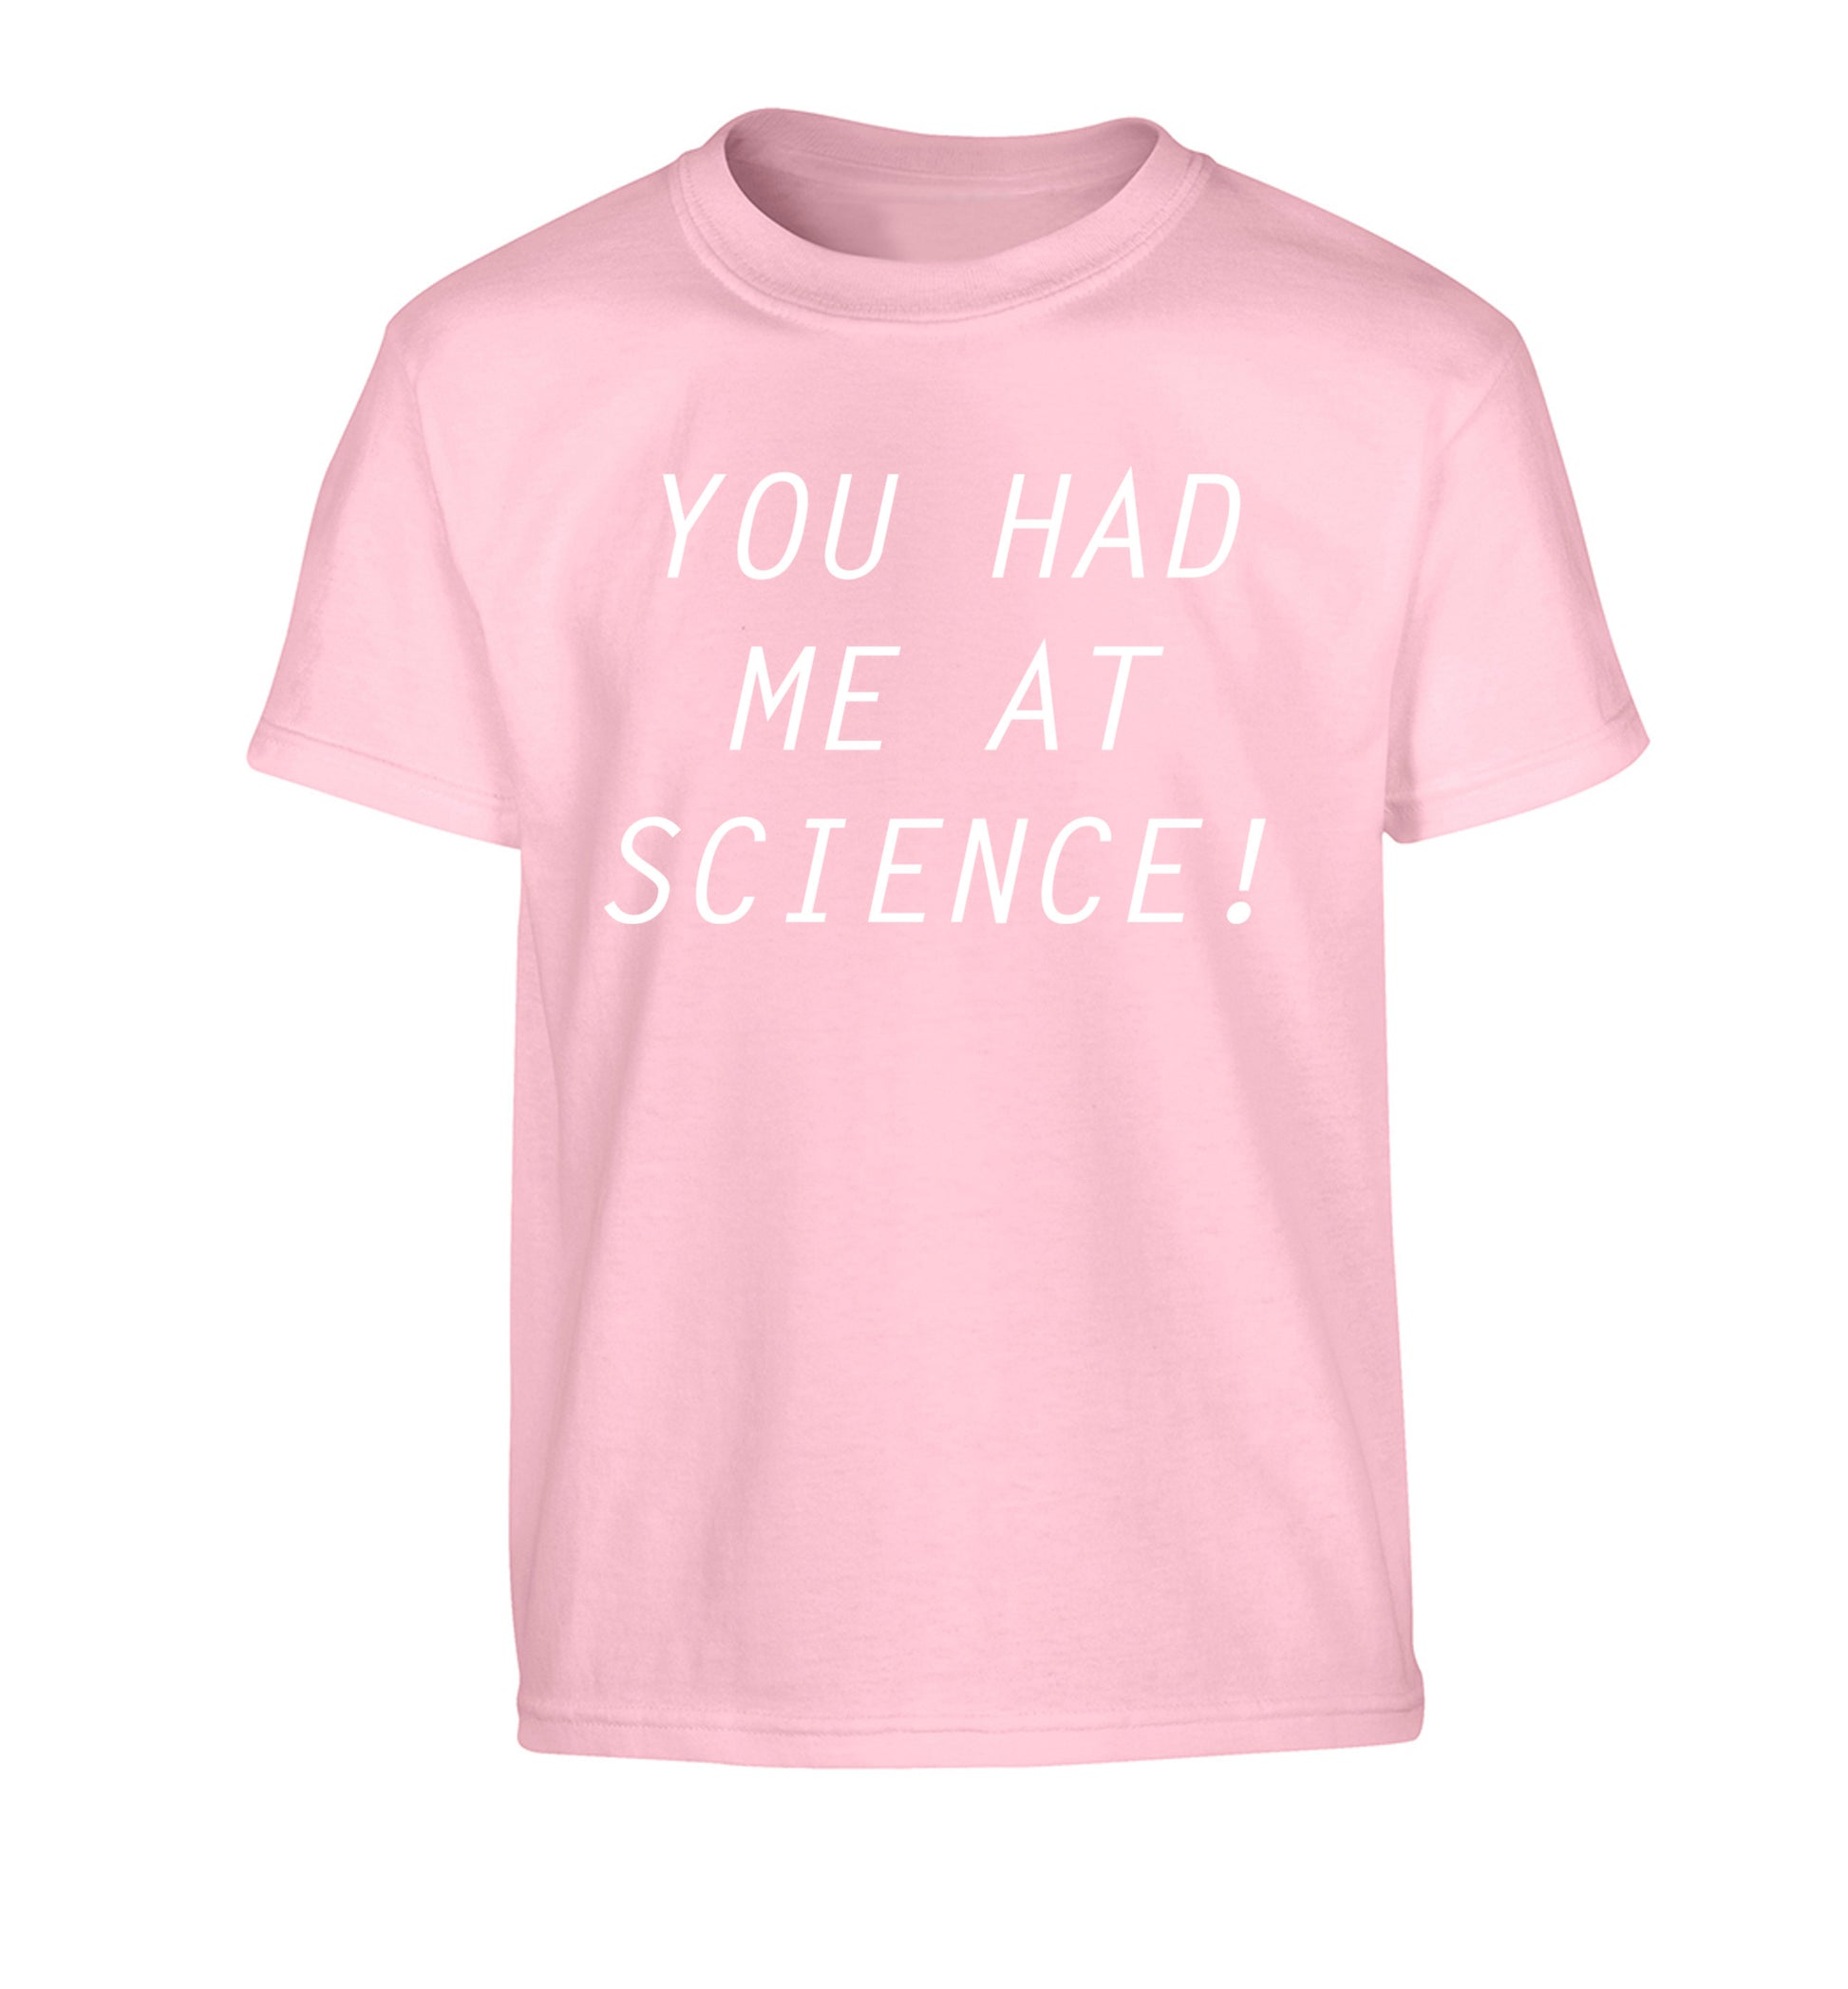 You had me at science Children's light pink Tshirt 12-14 Years